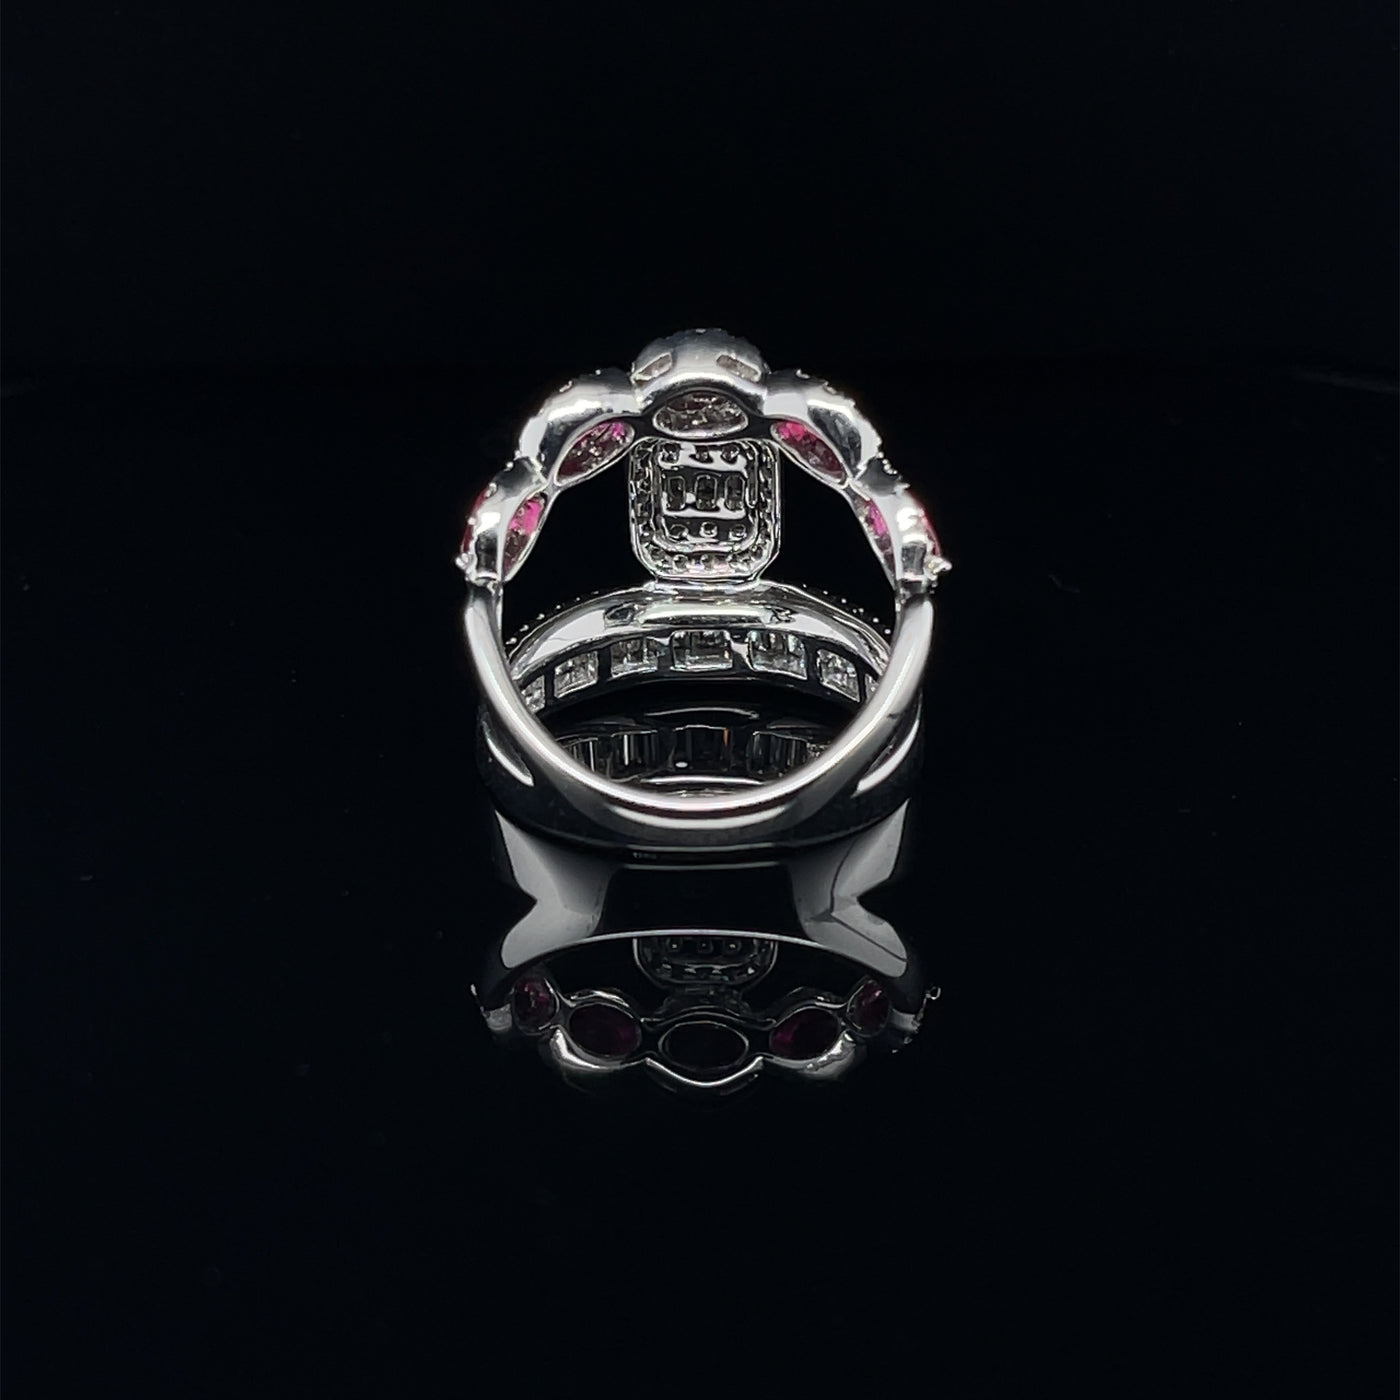 'Love' 18CT white gold  Ruby and Diamond ring